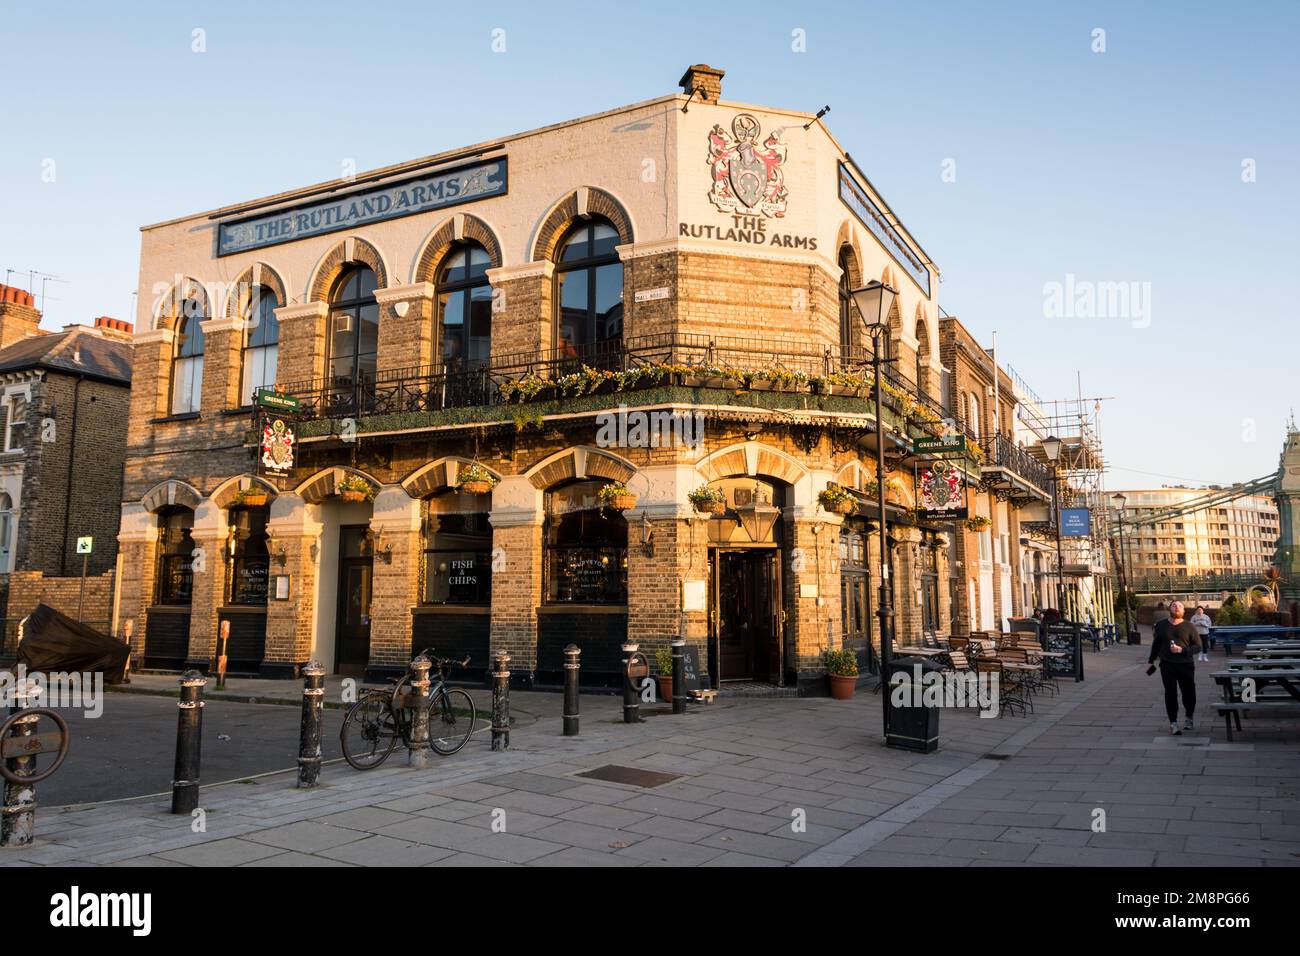 The Rutland Arms pub next to the River Thames in Hammersmith, West London, England, U.K. Stock Photo